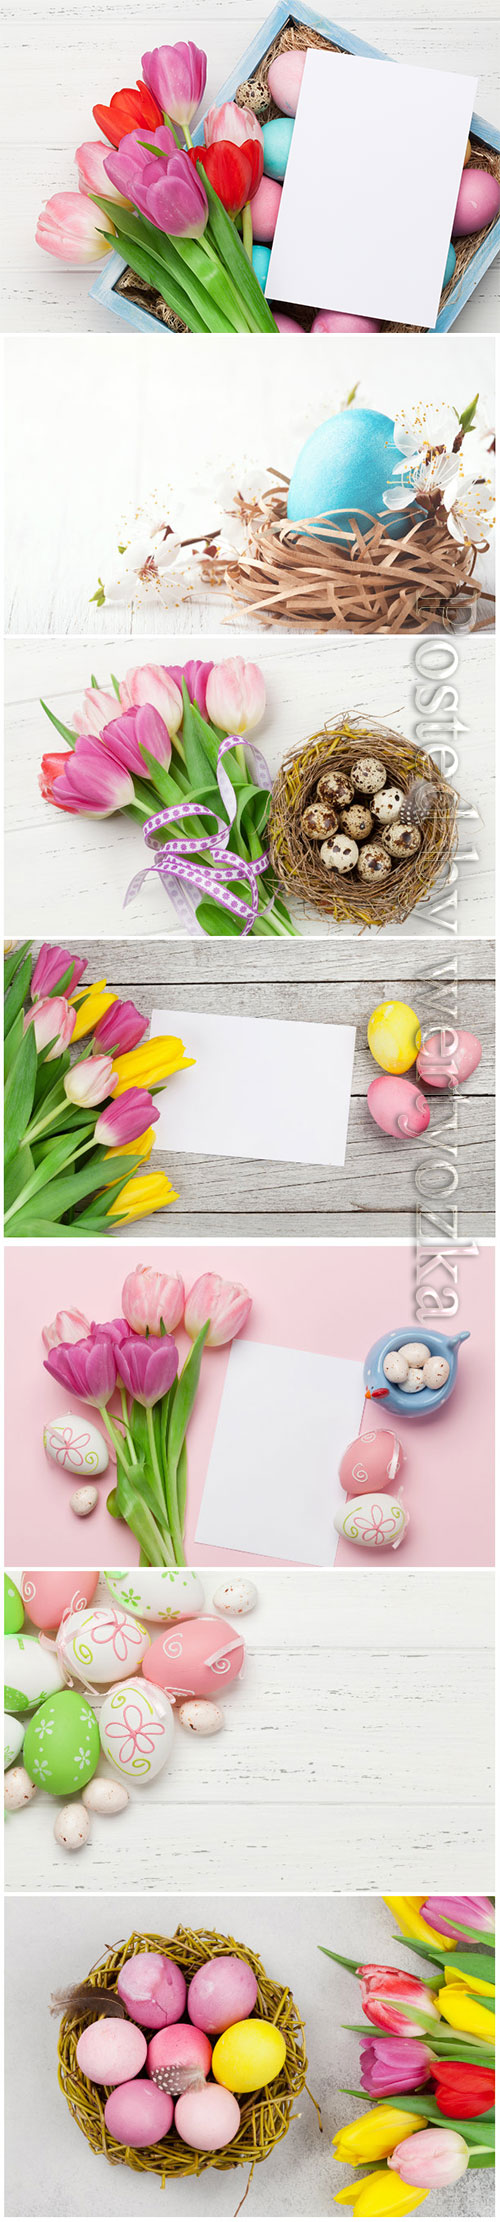 Happy Easter stock photo, Easter eggs, spring flowers # 2